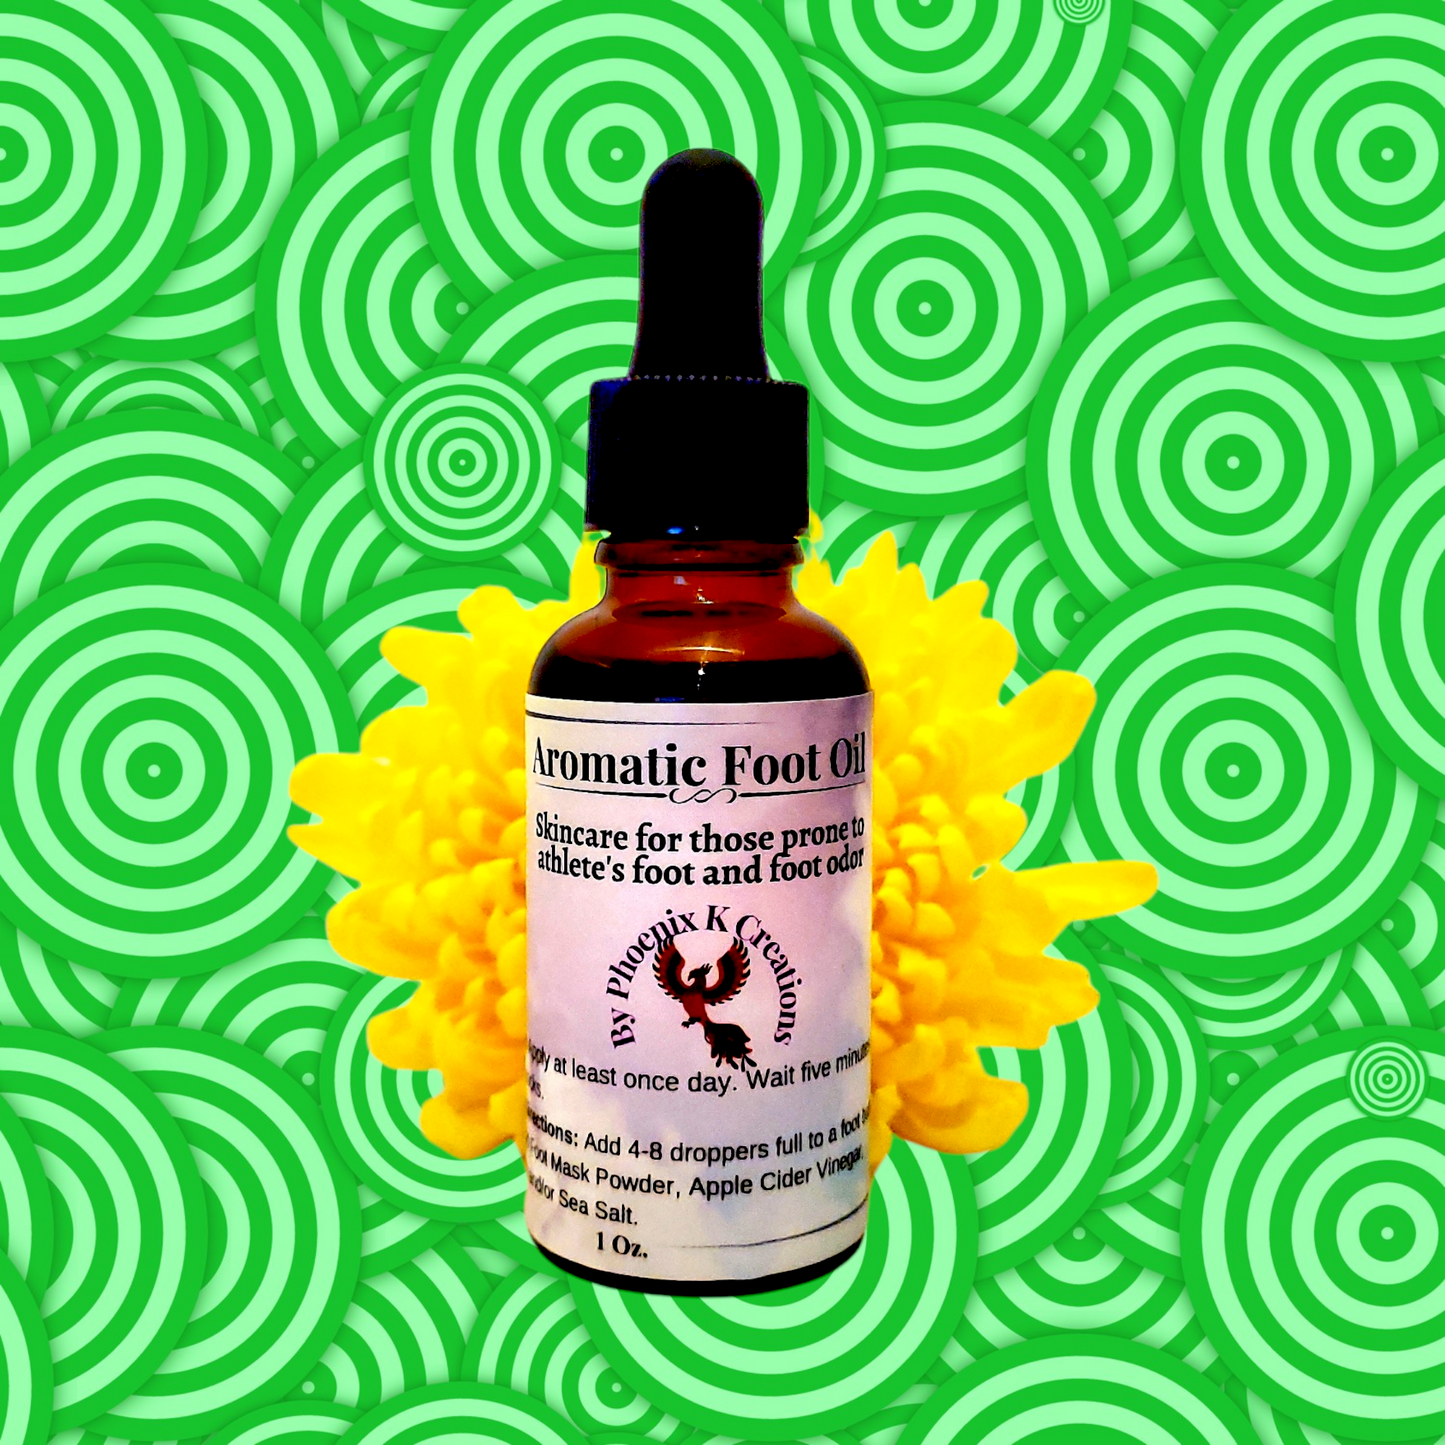 Organic Aromatic Foot Oil- Skincare for Athlete's Foot